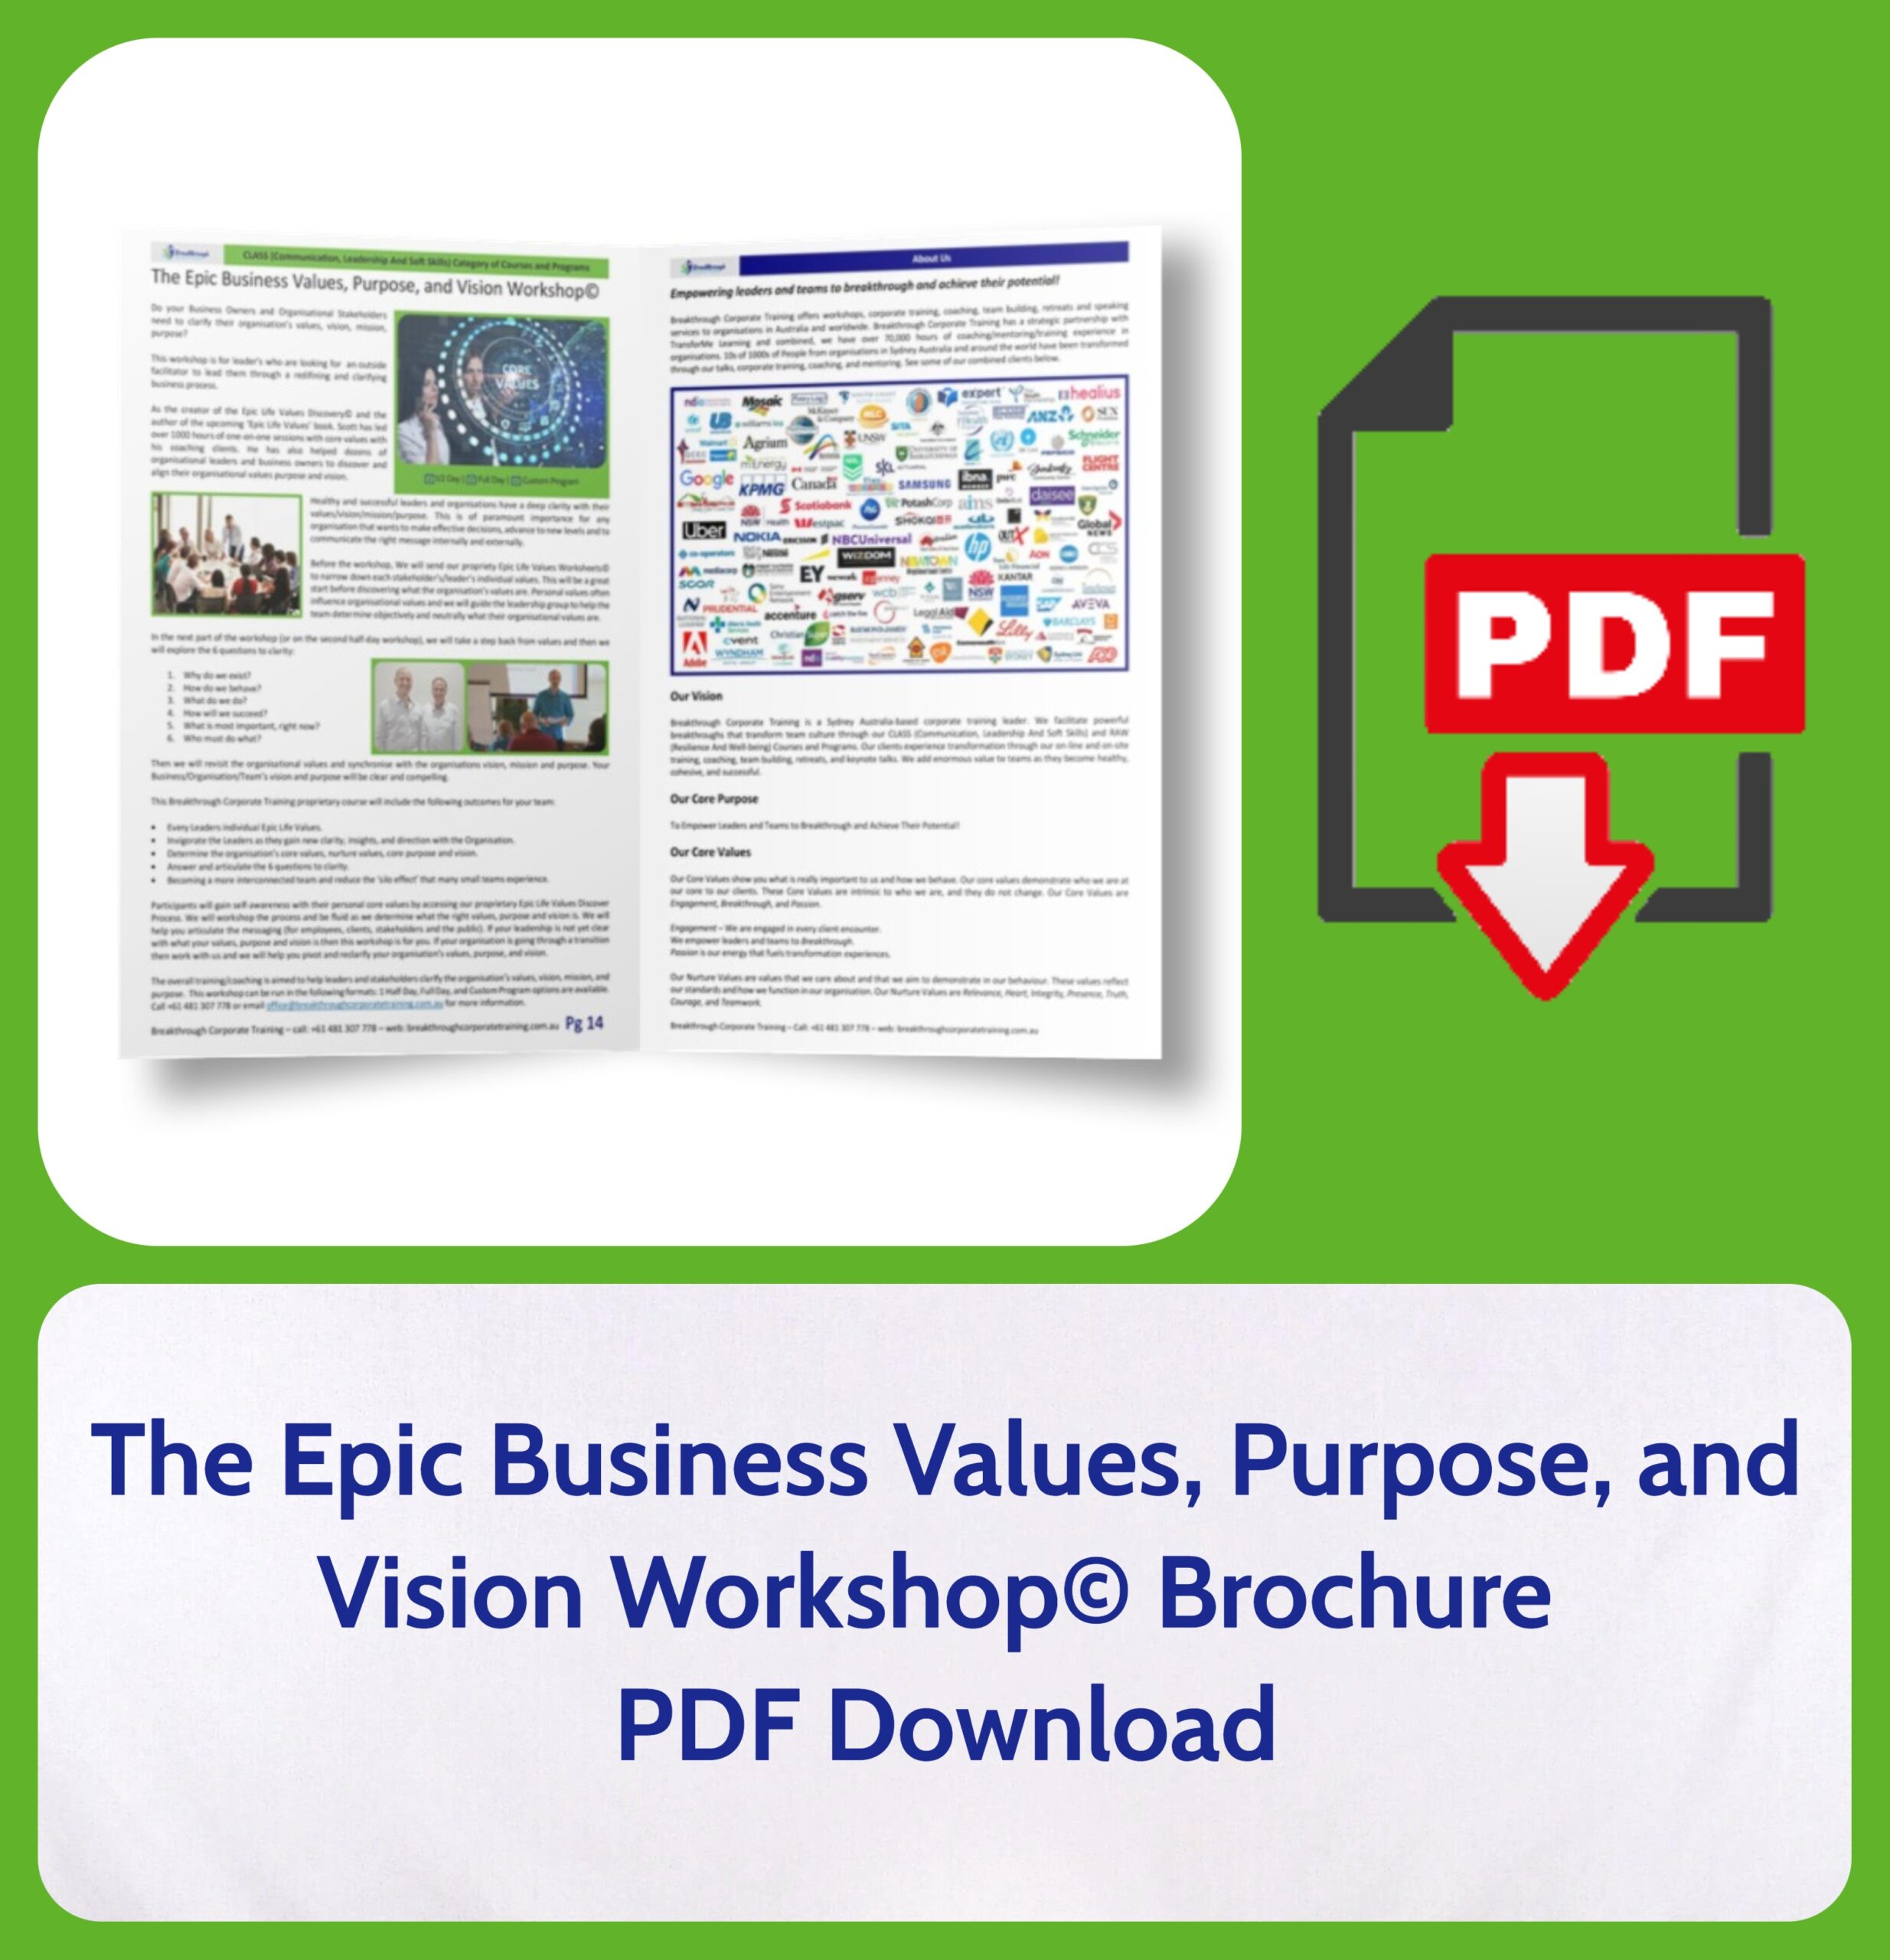 The Epic Business Values